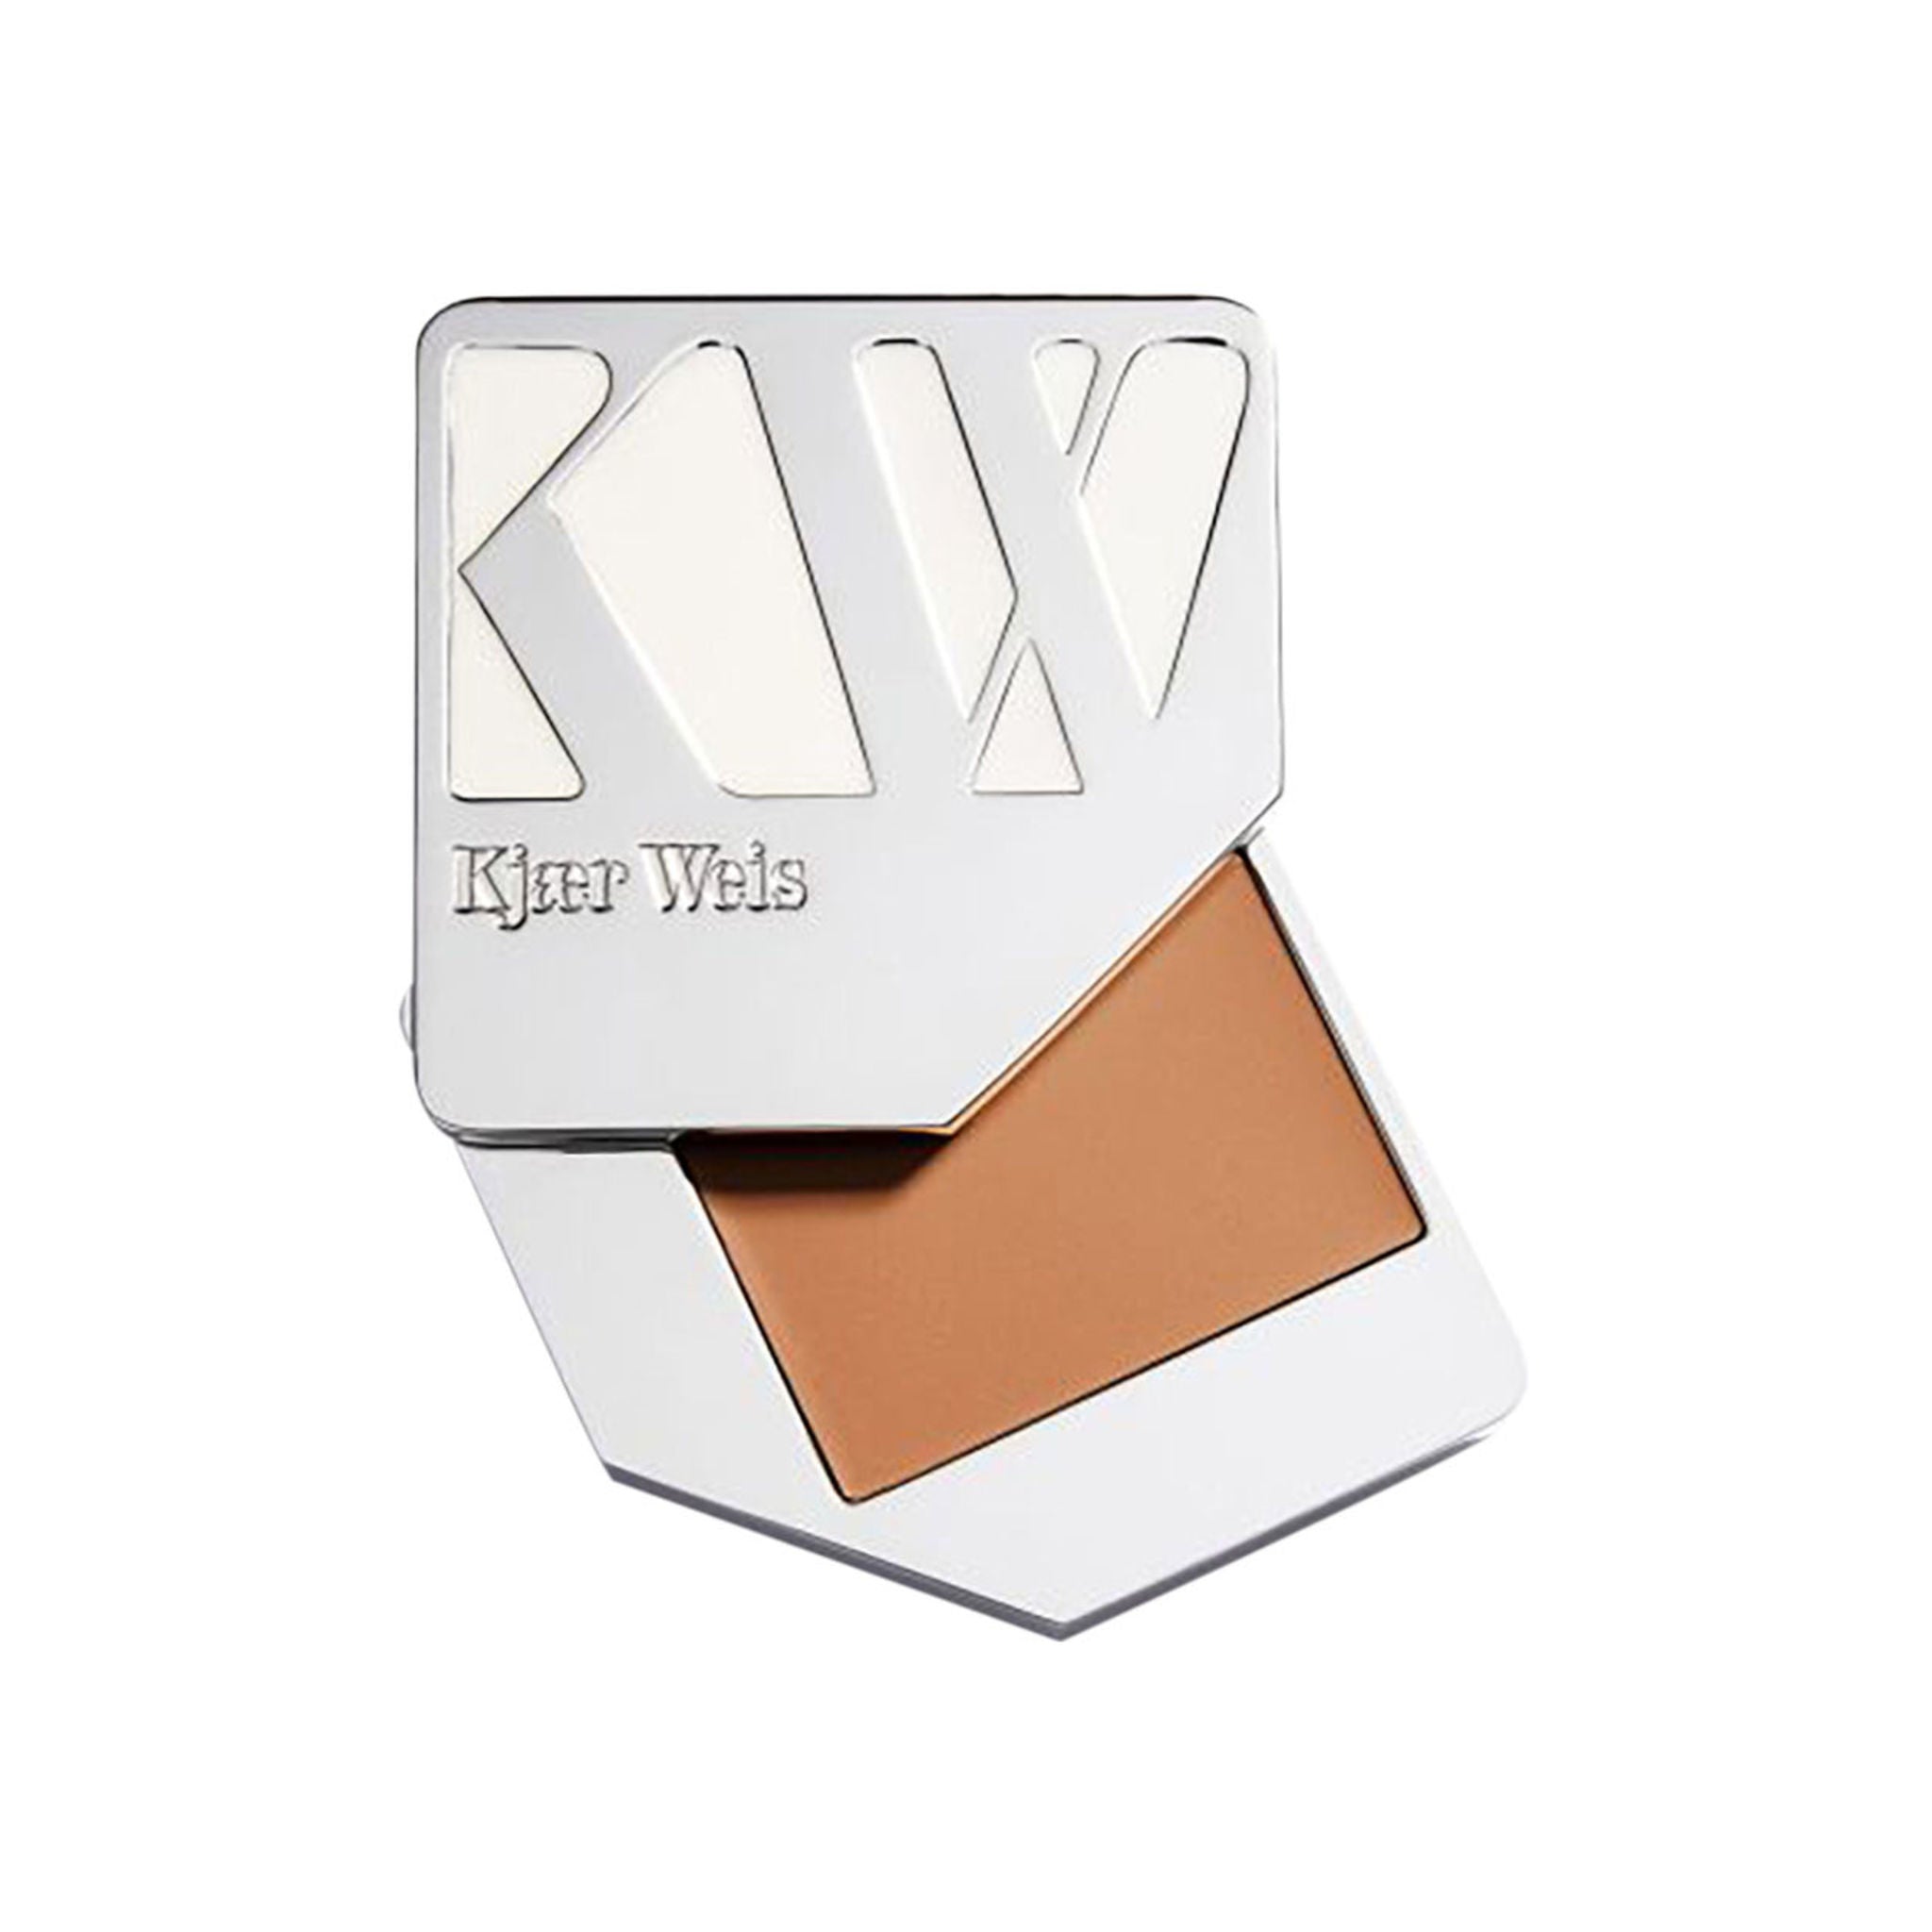 Kjaer Weis Cream Foundation Color/Shade variant: Dainty main image. This product is for light complexions